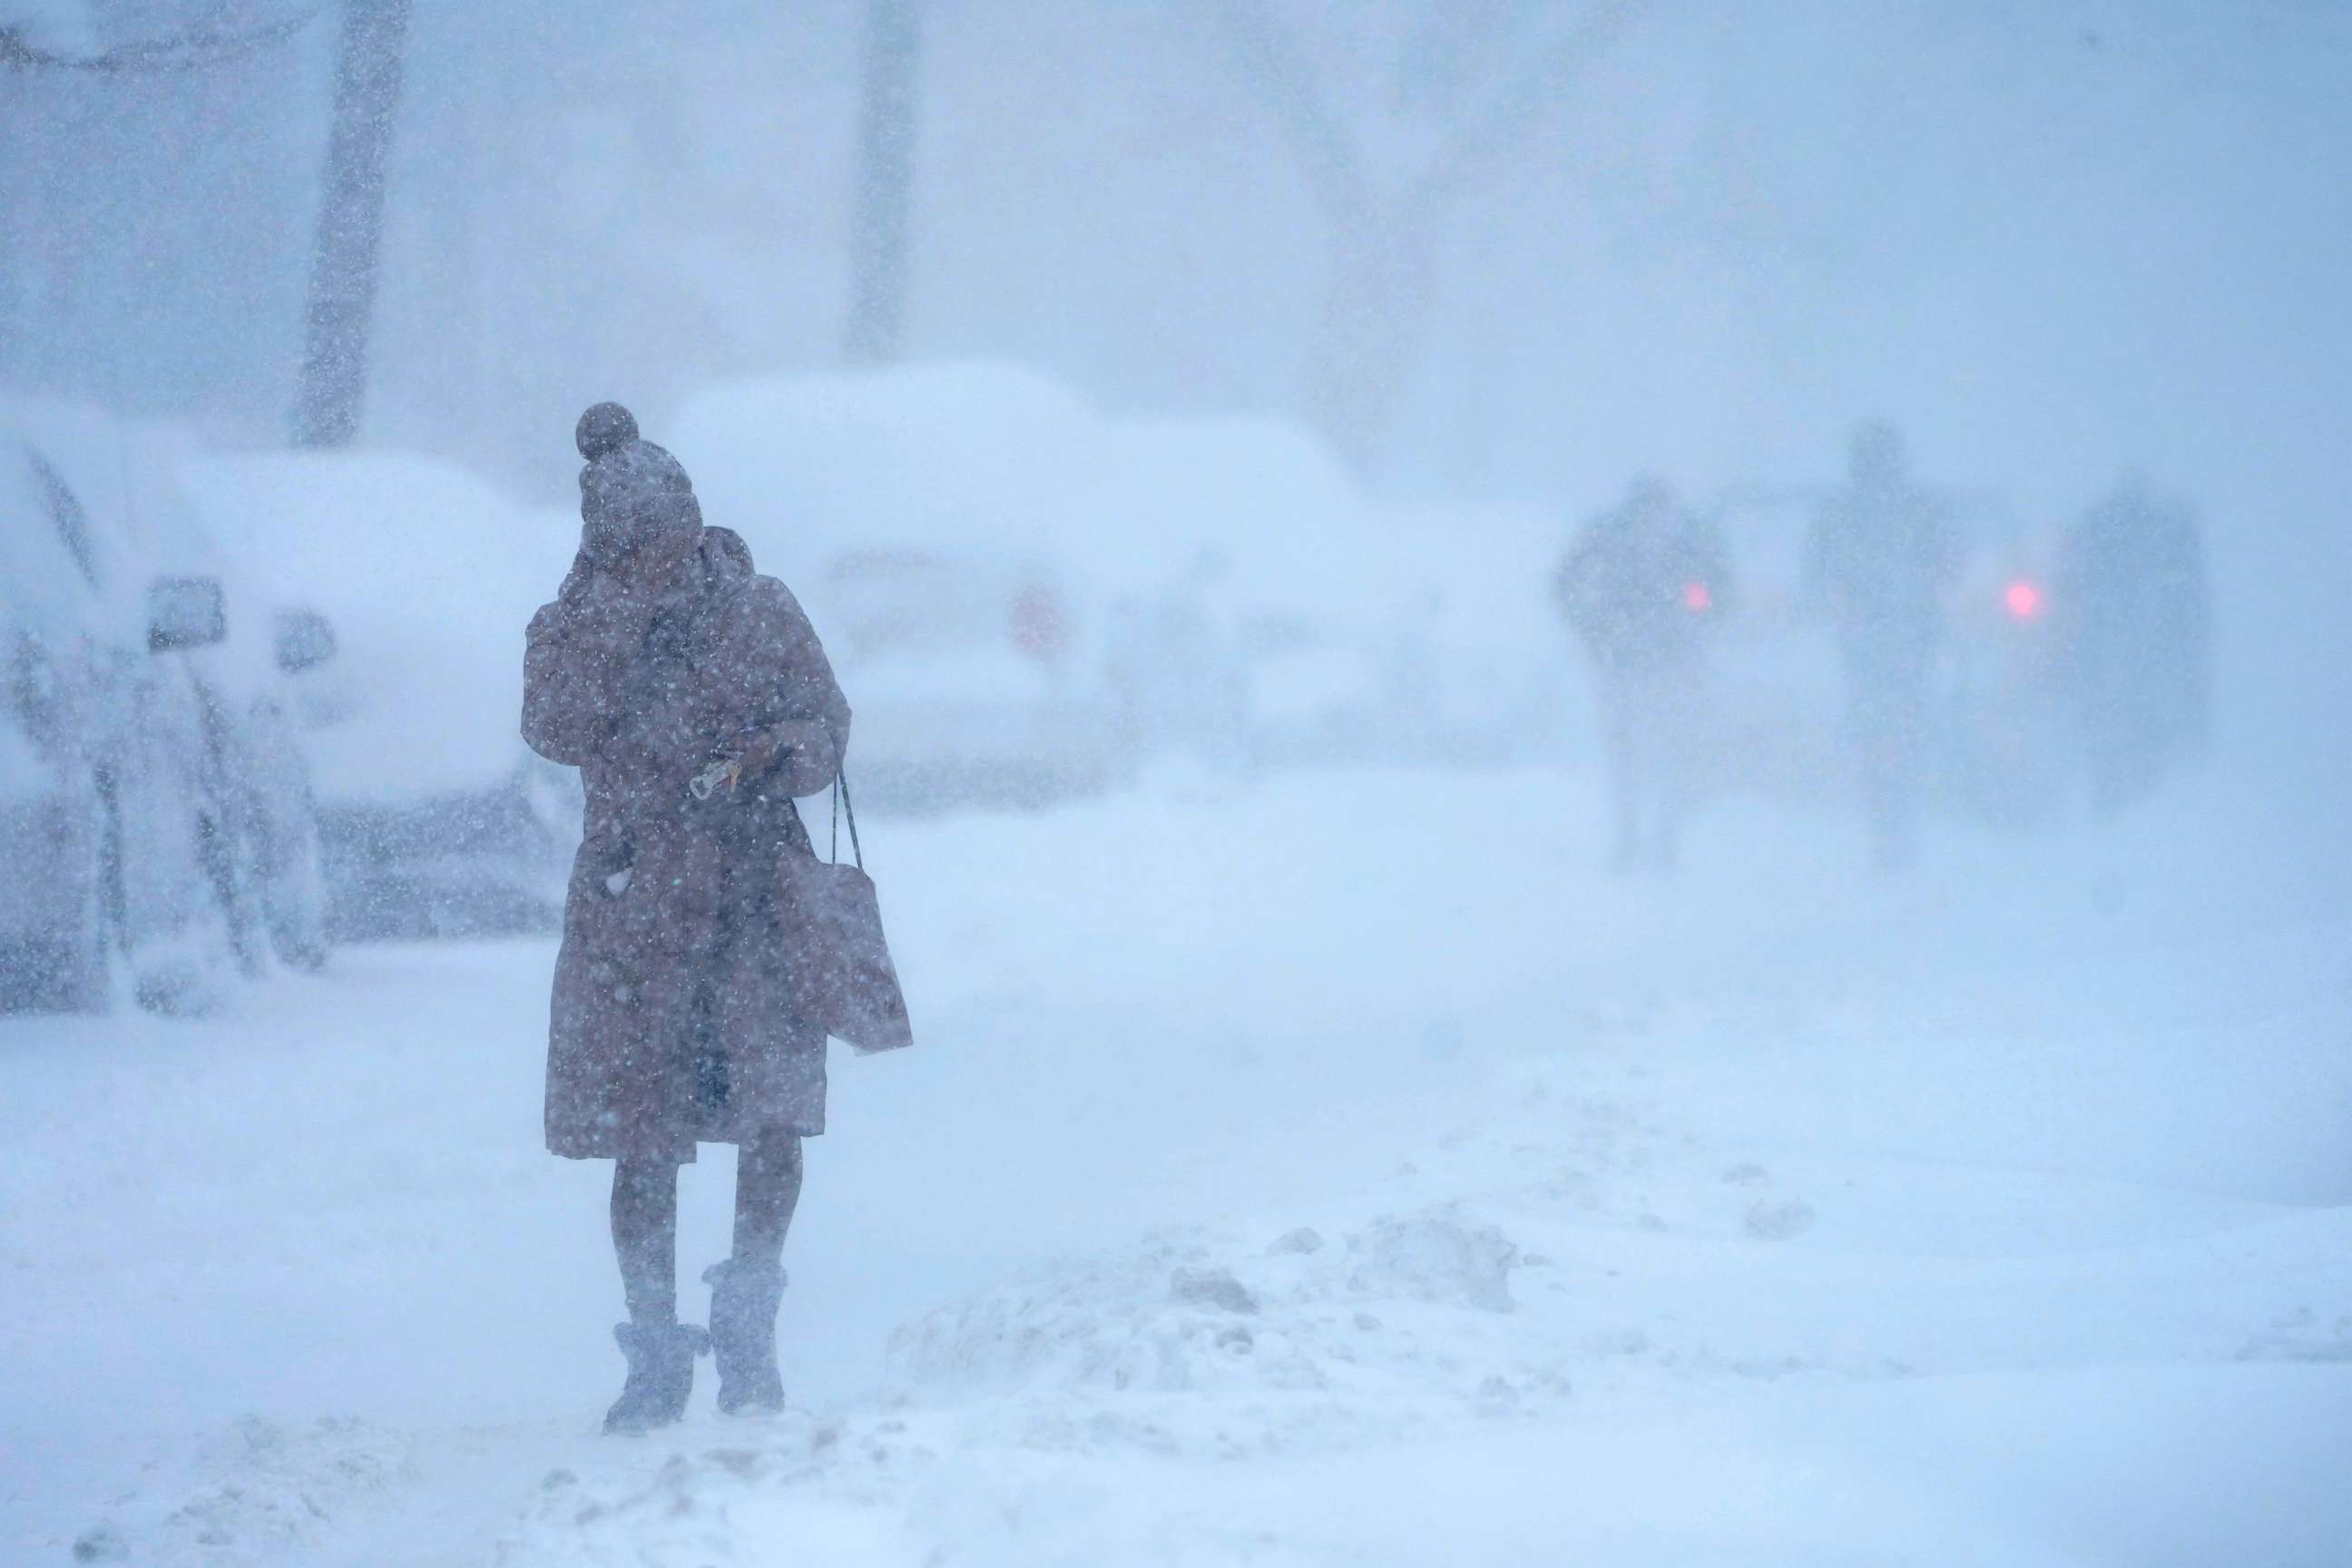 PHOTO: A woman tries to protect her face from blowing snow while walking in white-out conditions in Jersey City, N.J., Feb. 1, 2021.